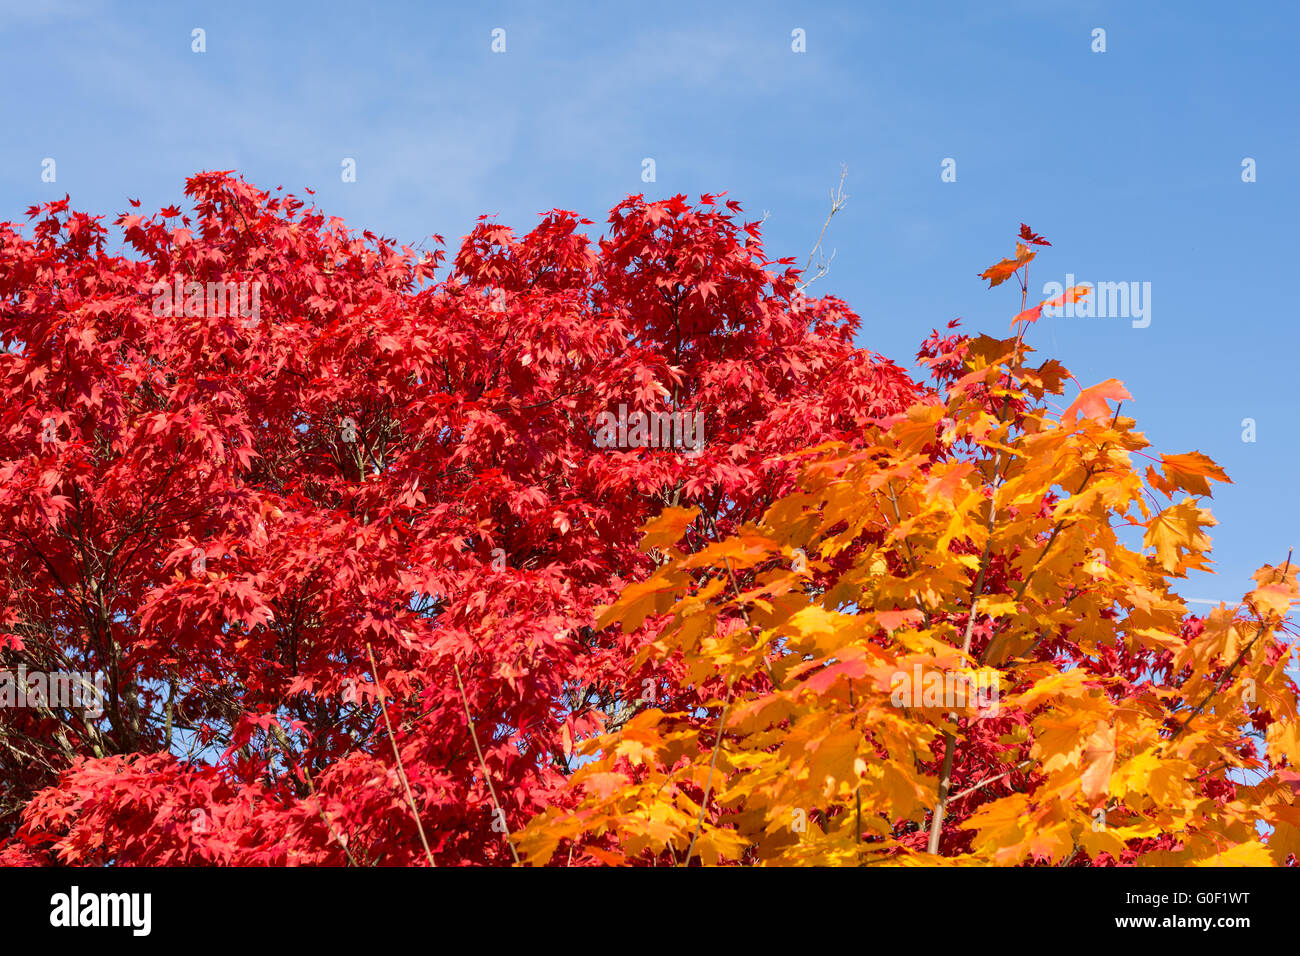 bright colors of autumn maples Stock Photo